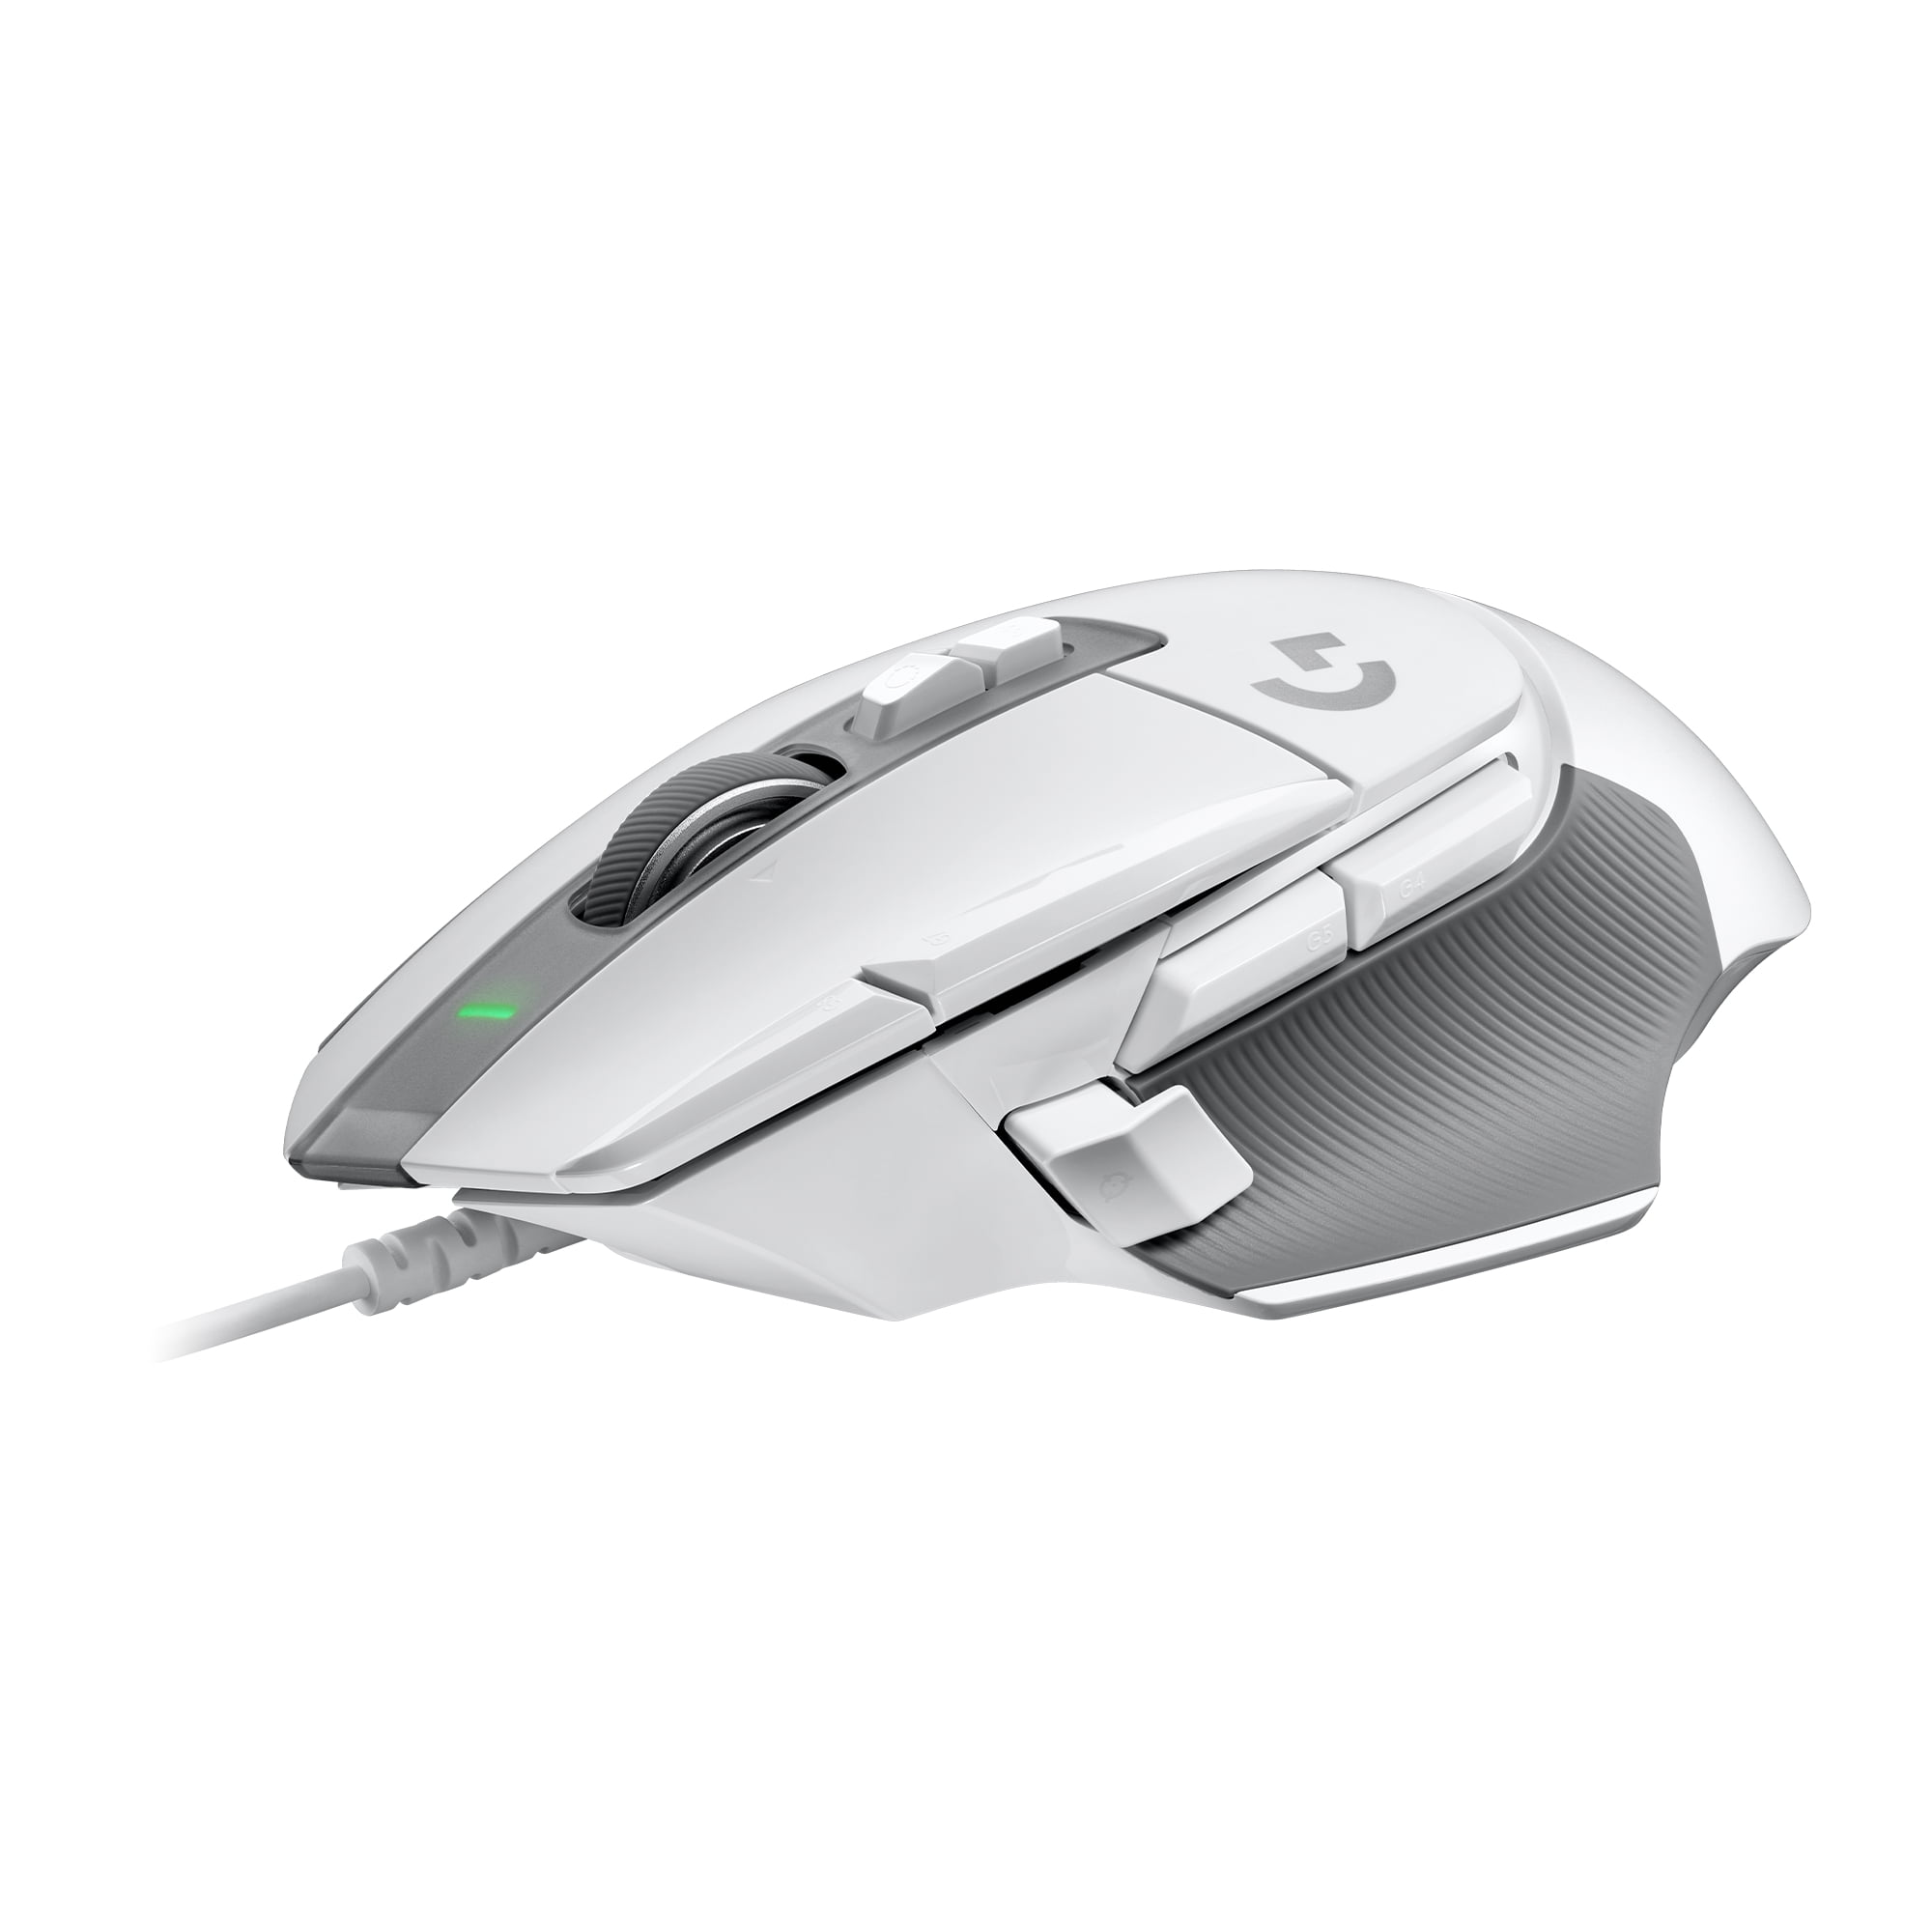 Logitech G502 X Wired Gaming Mouse - LIGHTFORCE hybrid optical-mechanical primary HERO 25K gaming sensor, compatible with - macOS/Windows - White - Walmart.com